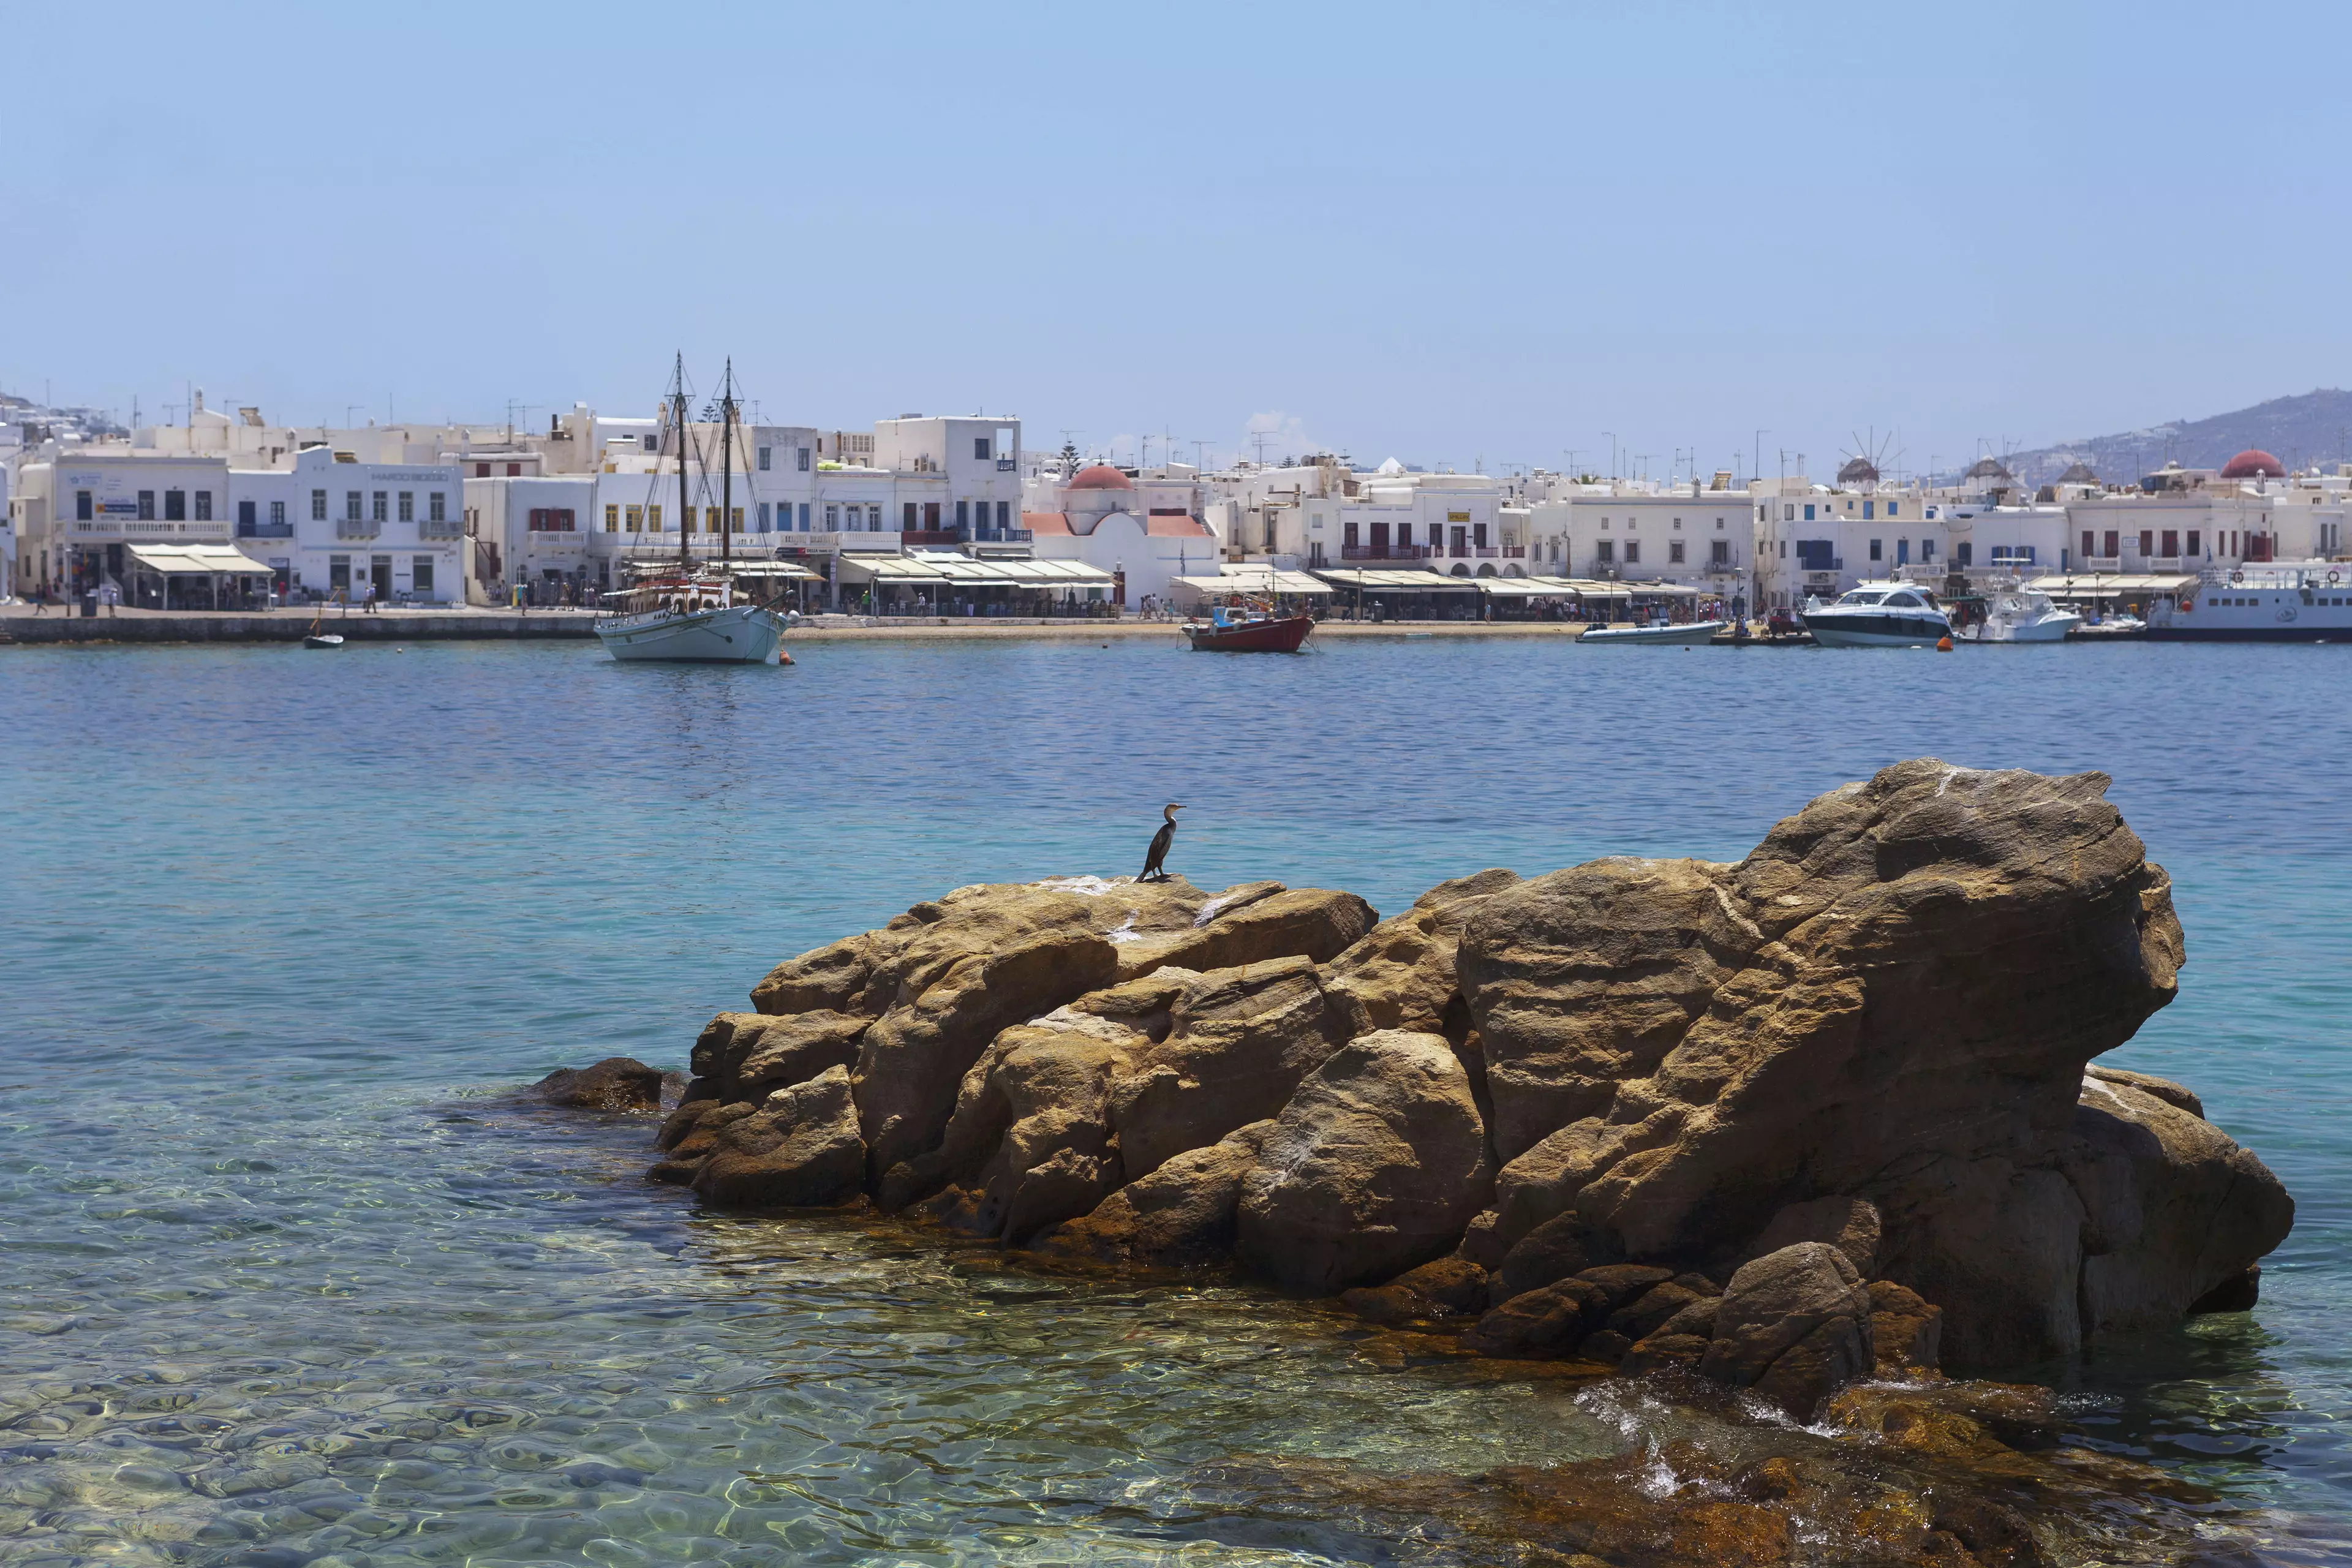 Mykonos is known for beautiful beaches.